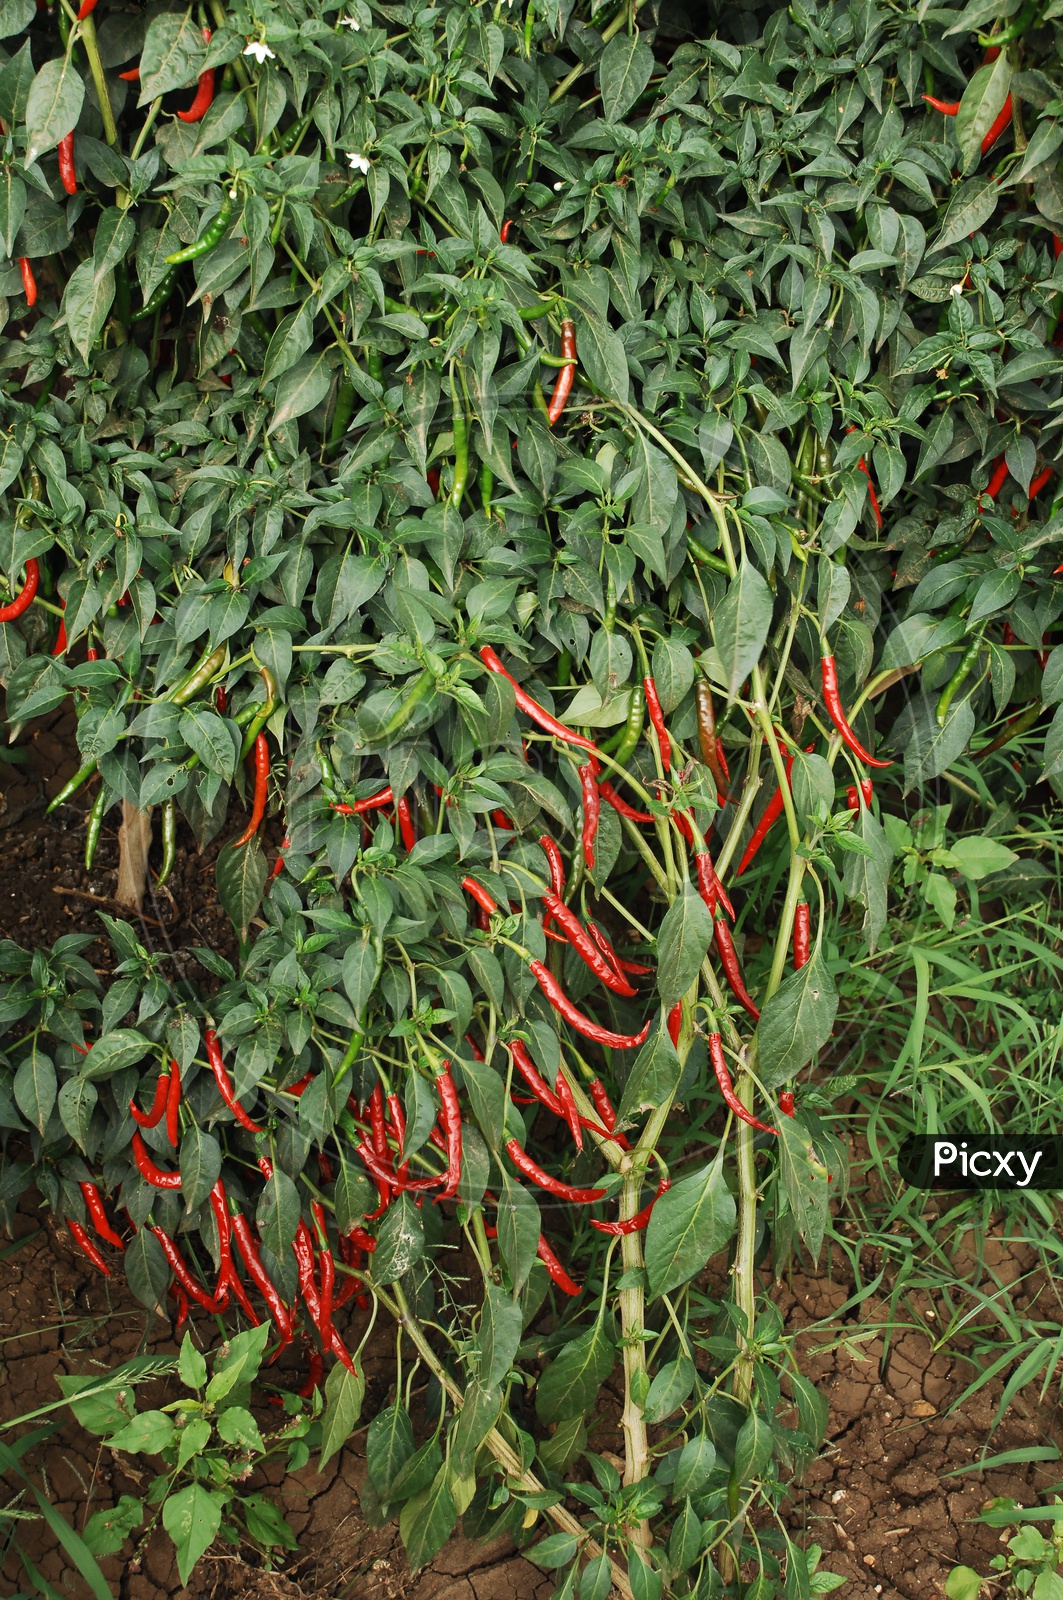 Indian Red Chillies On Plants in a Farm Field